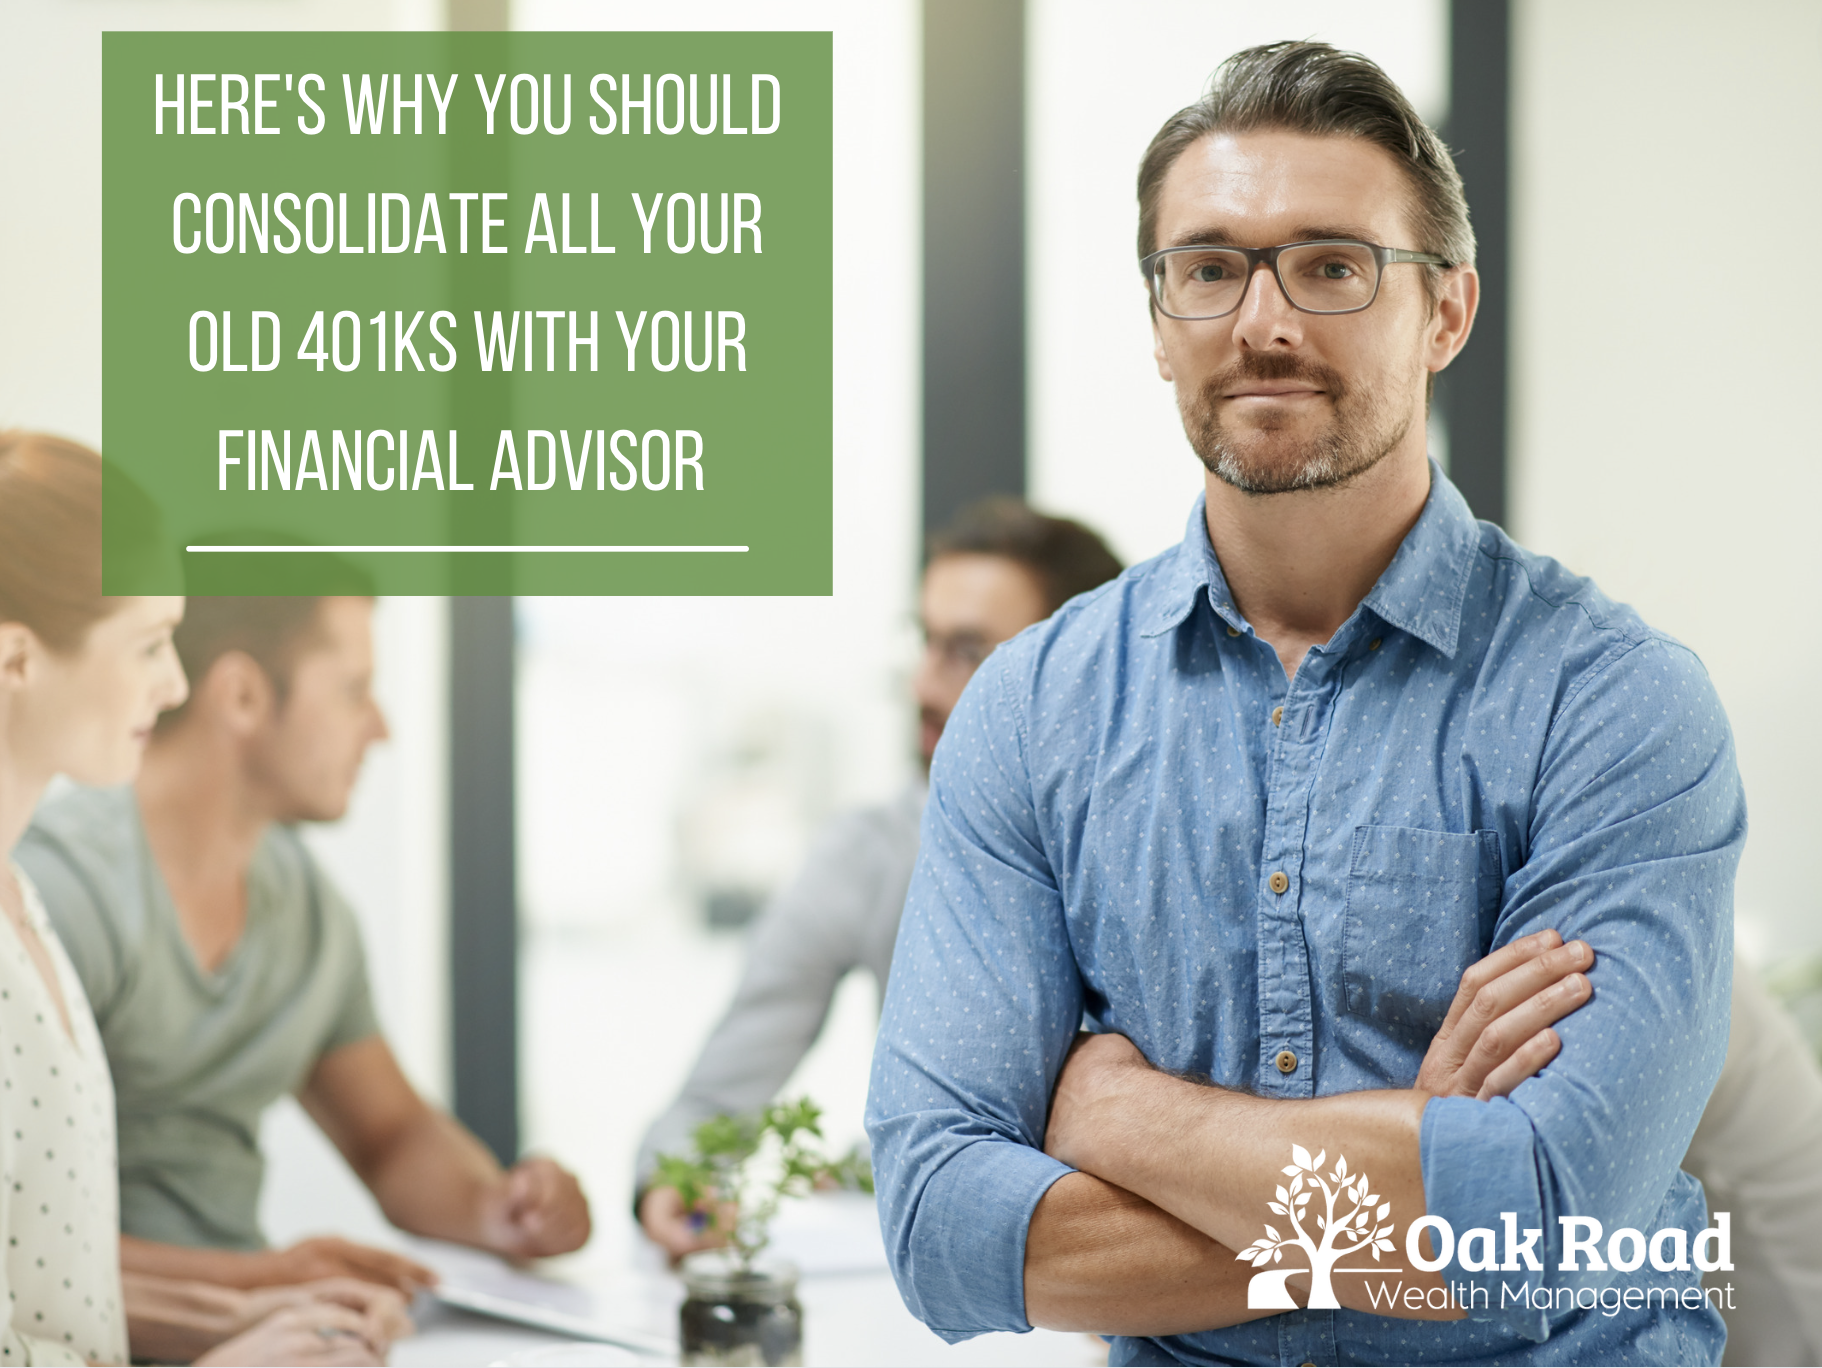 Here's Why You Should Consolidate All Your Old 401Ks With Your Financial Advisor